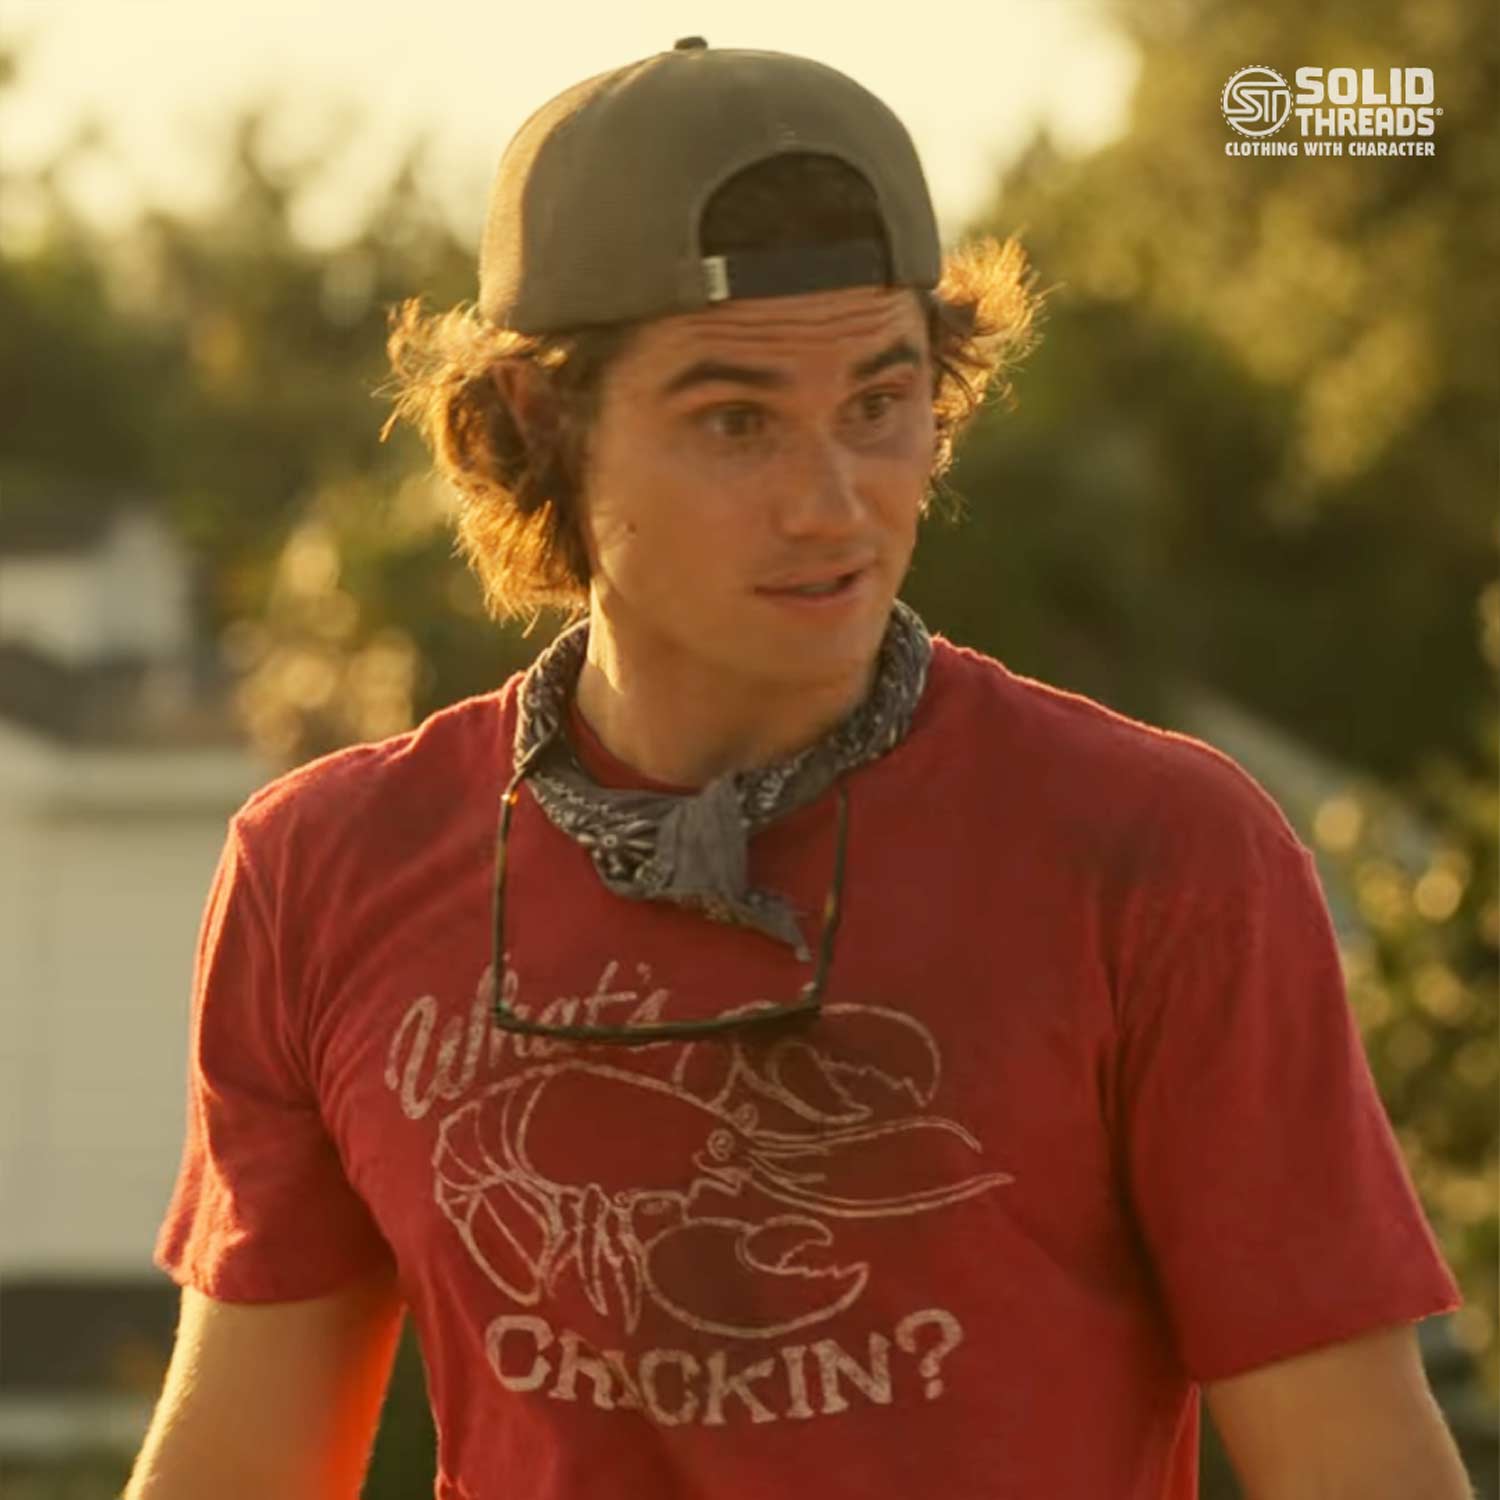 Men's What's Crackin T-Shirt As Seen on Neflix Outer Banks Worn by Chase Stokes | SOLID THREADS